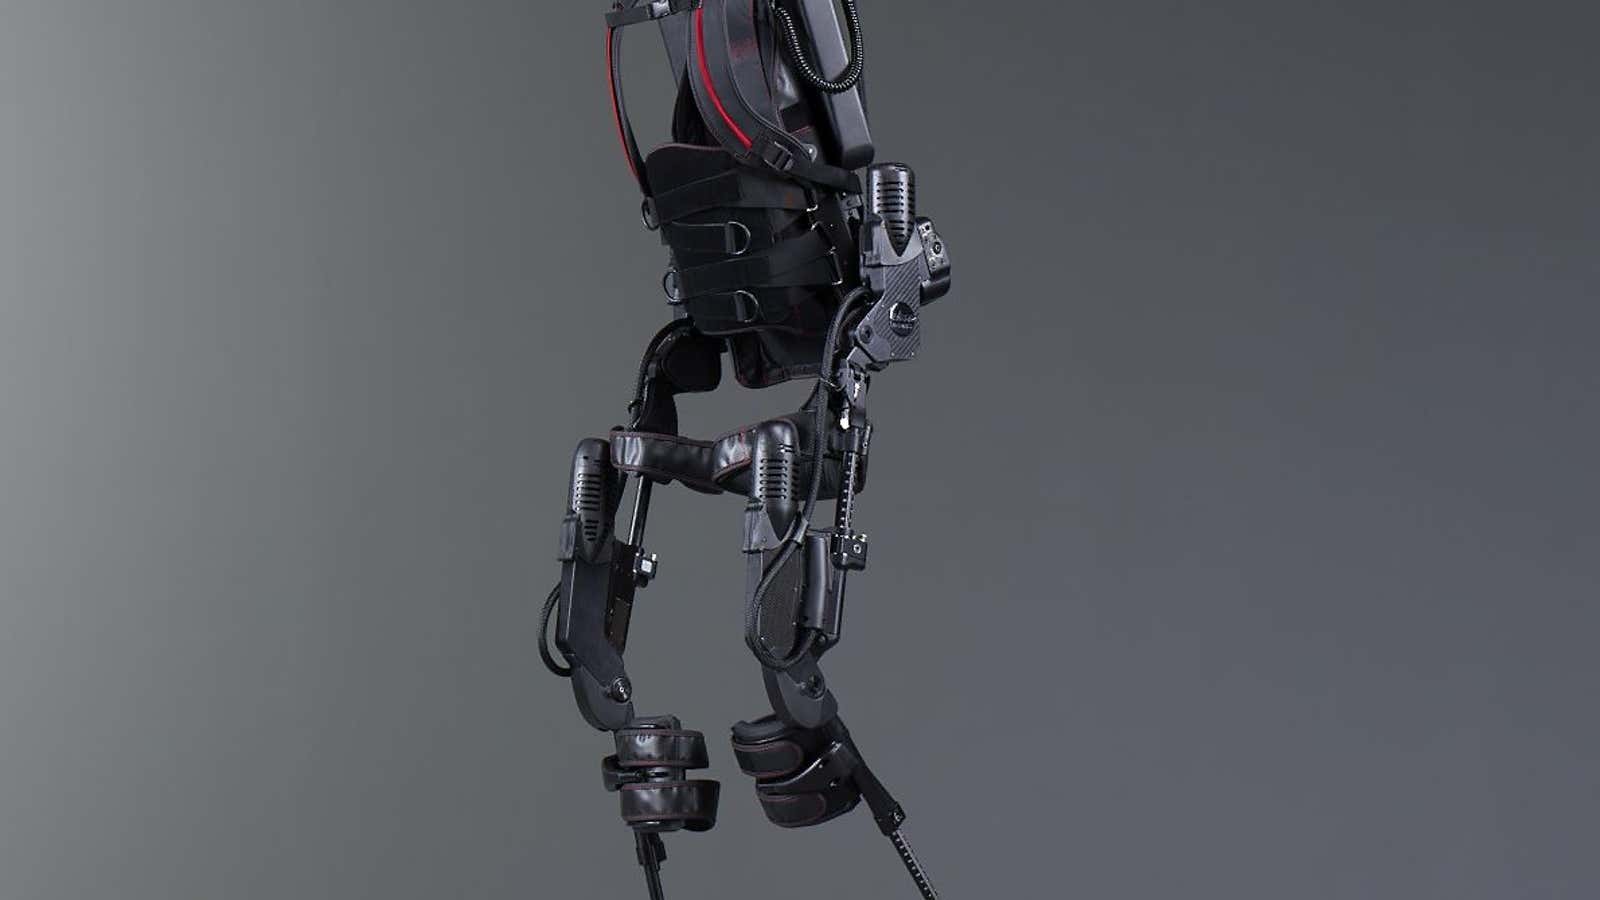 EksoGT is one of the first FDA-cleared exoskeletons for stroke and spinal cord injury rehabilitation.